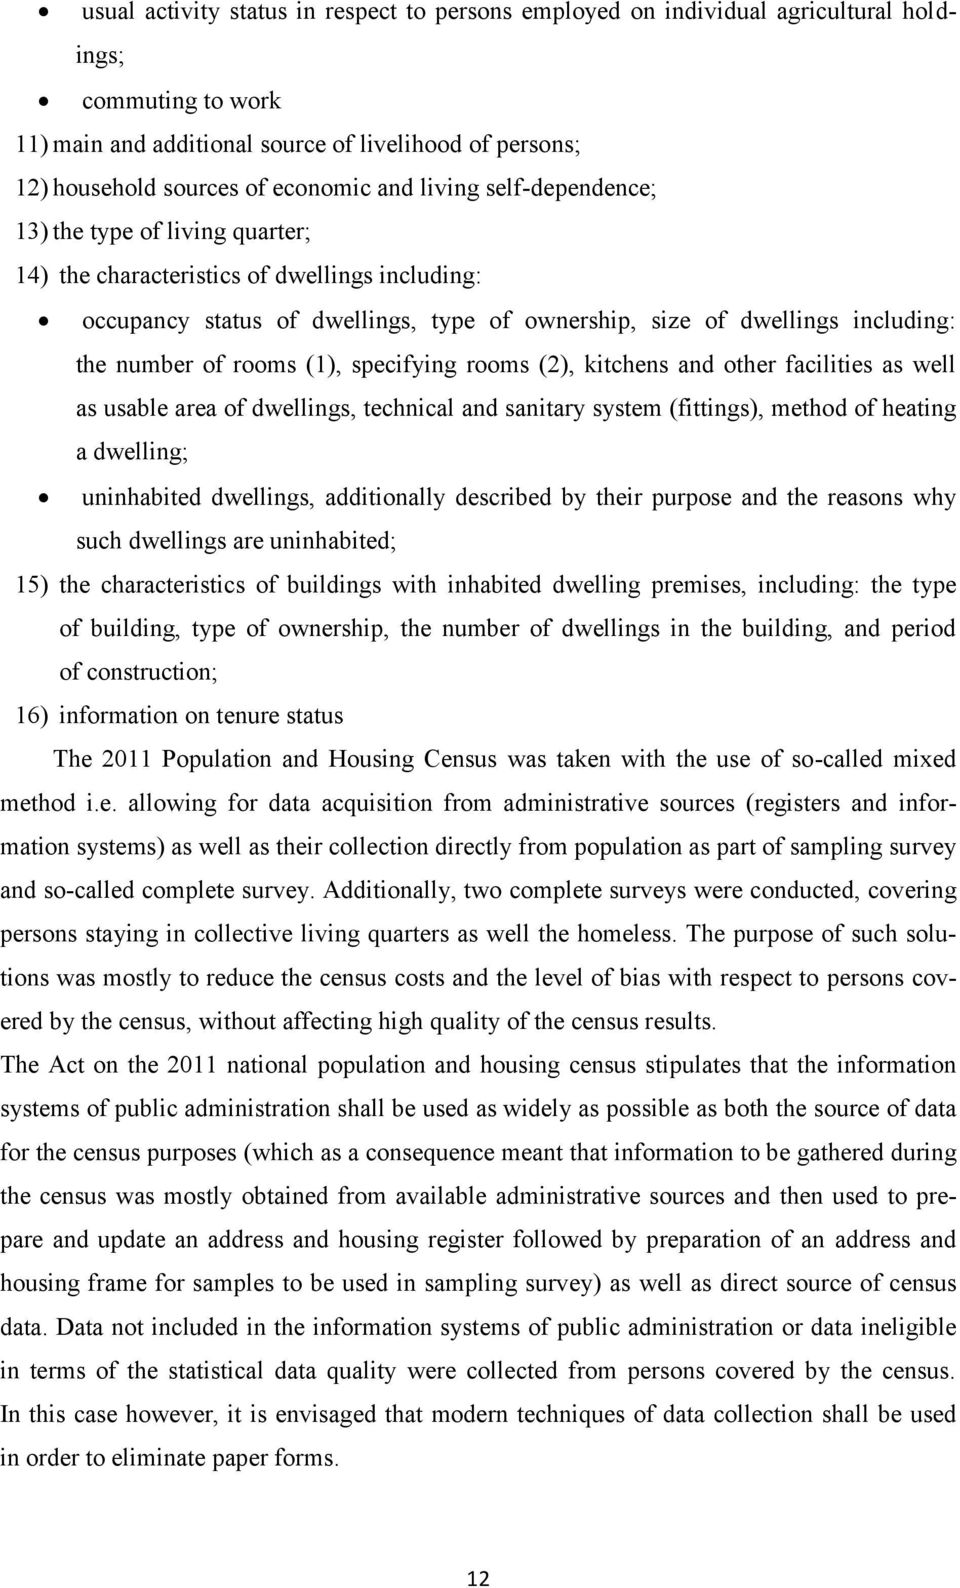 of rooms (1), specifying rooms (2), kitchens and other facilities as well as usable area of dwellings, technical and sanitary system (fittings), method of heating a dwelling; uninhabited dwellings,